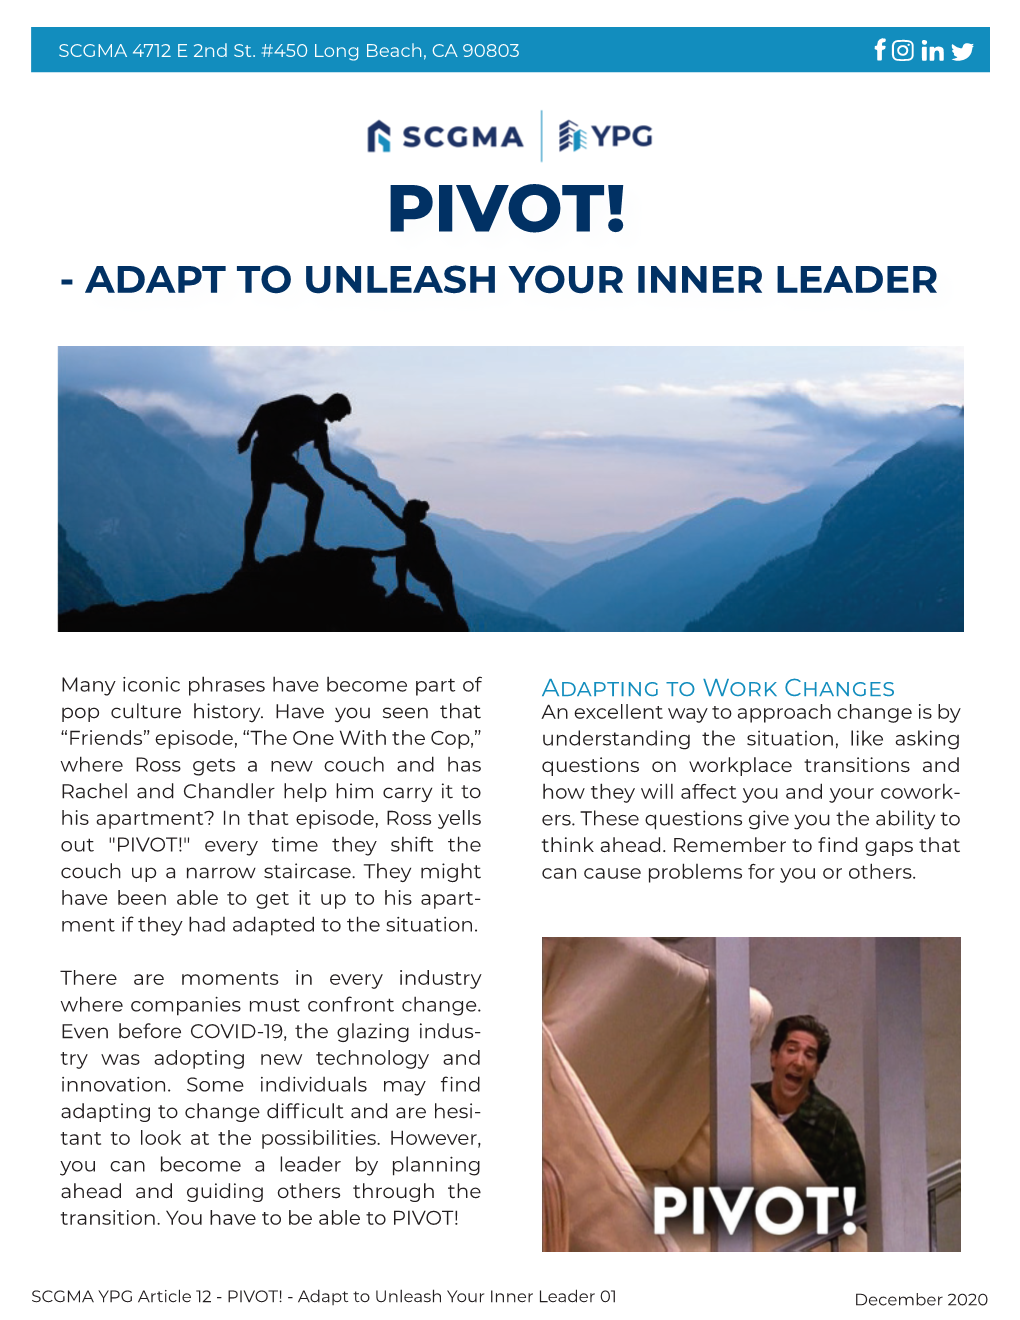 PIVOT! – Adapt to Unleash Your Inner Leader